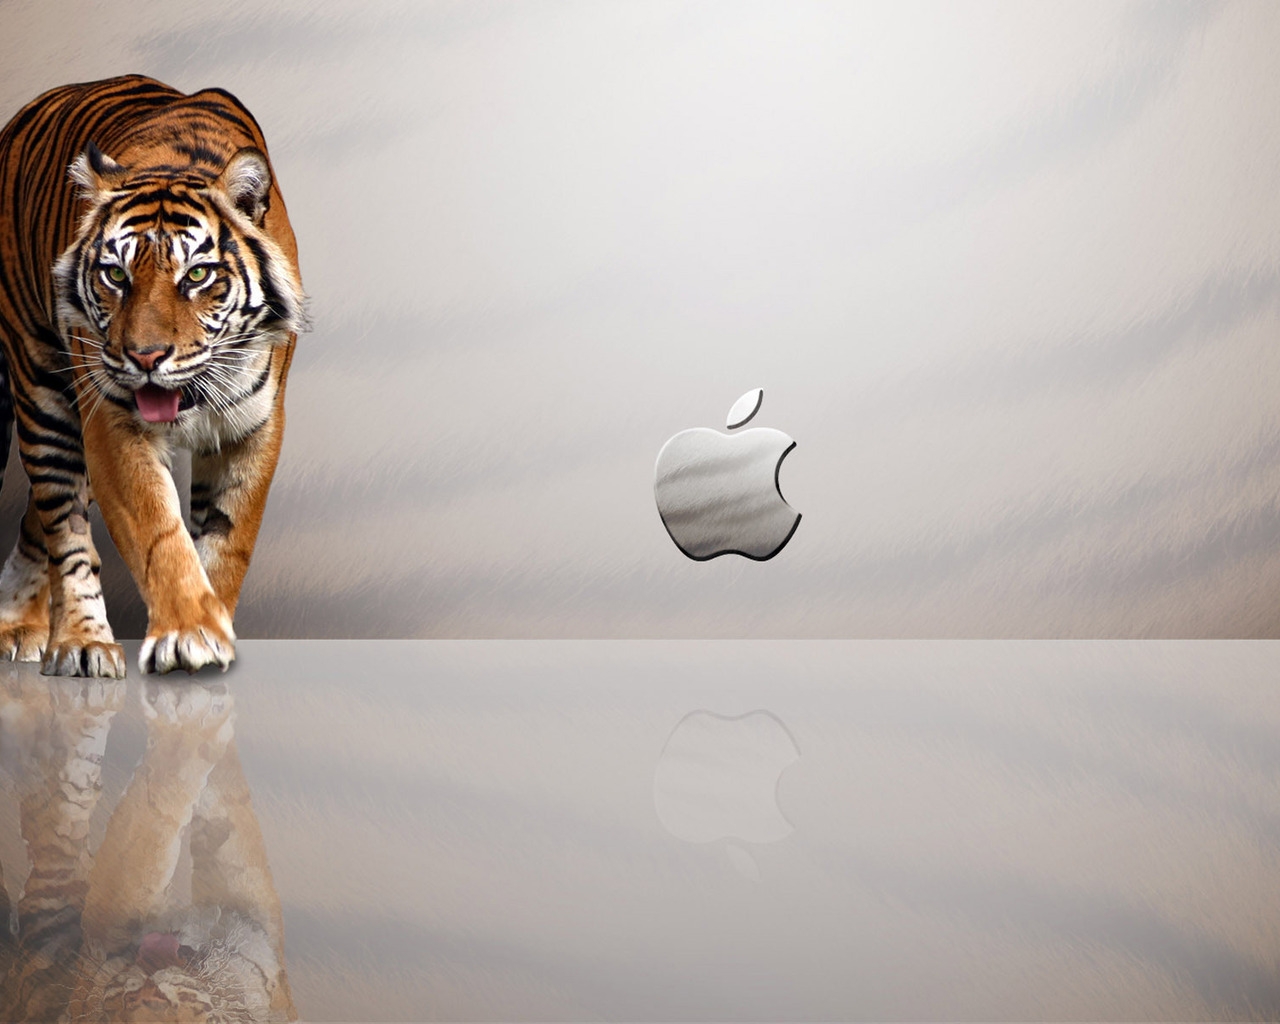 Tiger Apple for 1280 x 1024 resolution